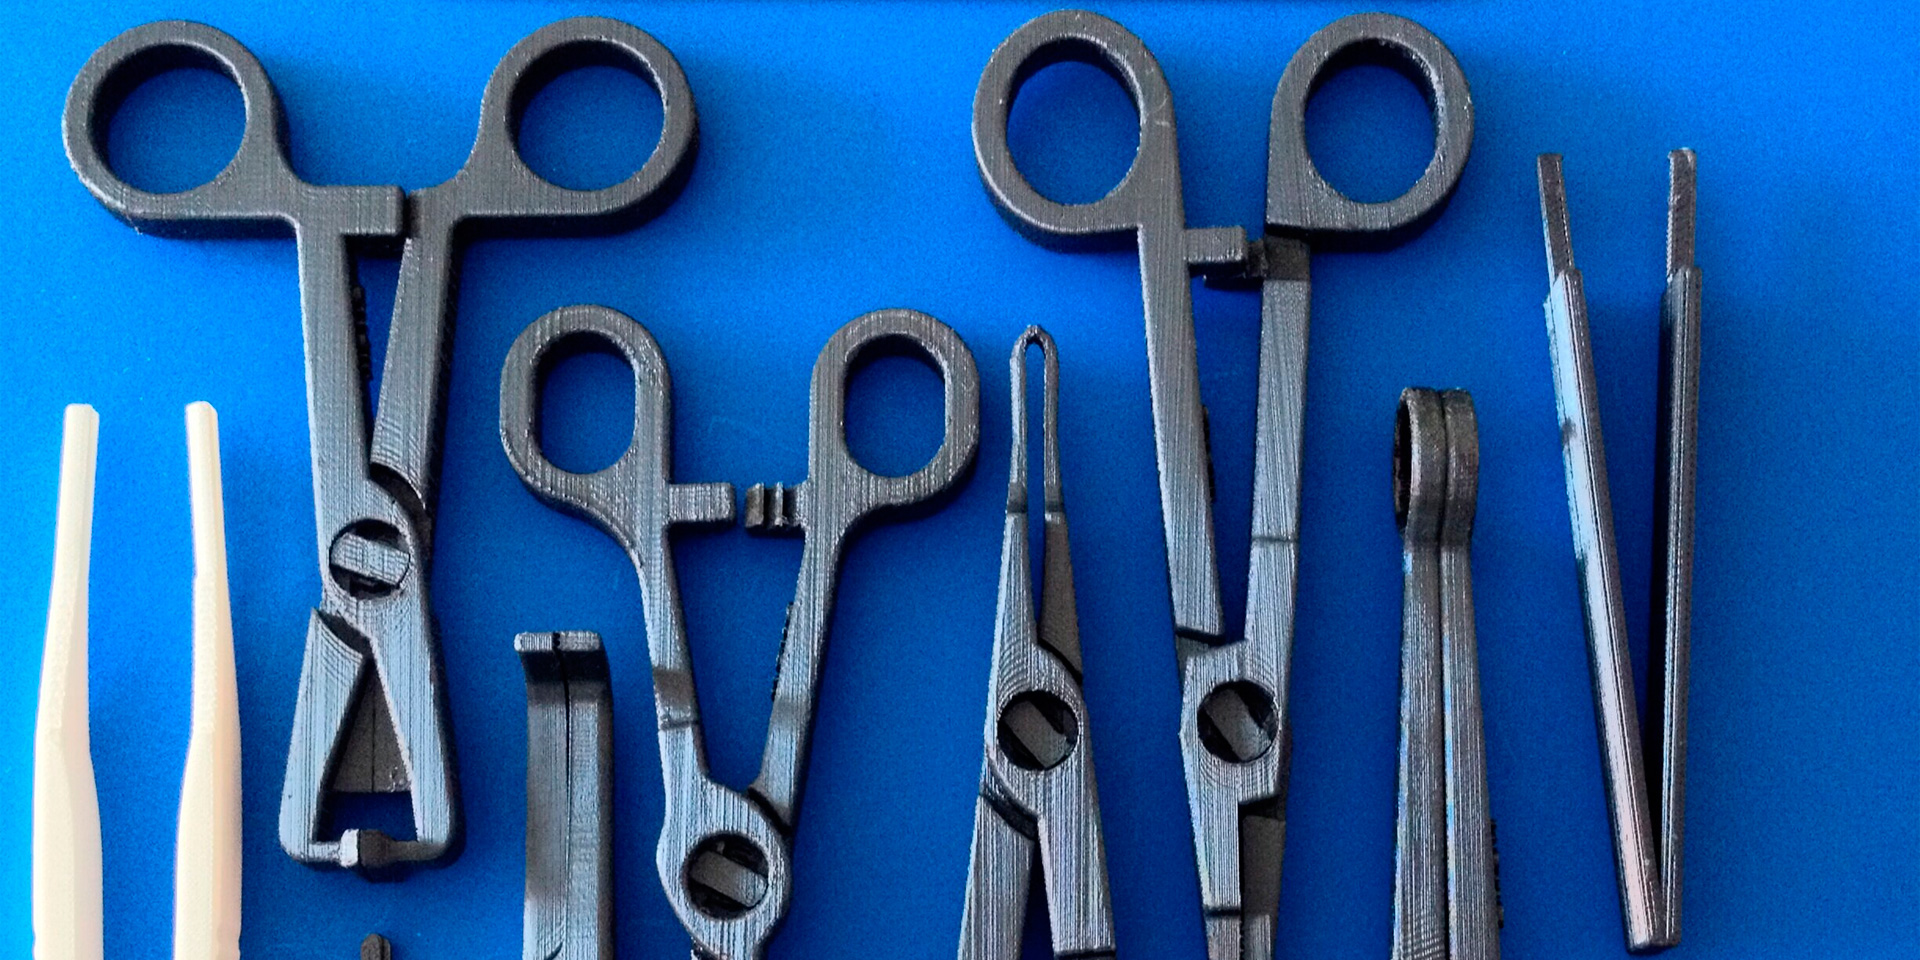 What Are The Advantages Of 3D Printed Surgical Tools In Modern Healthcare?